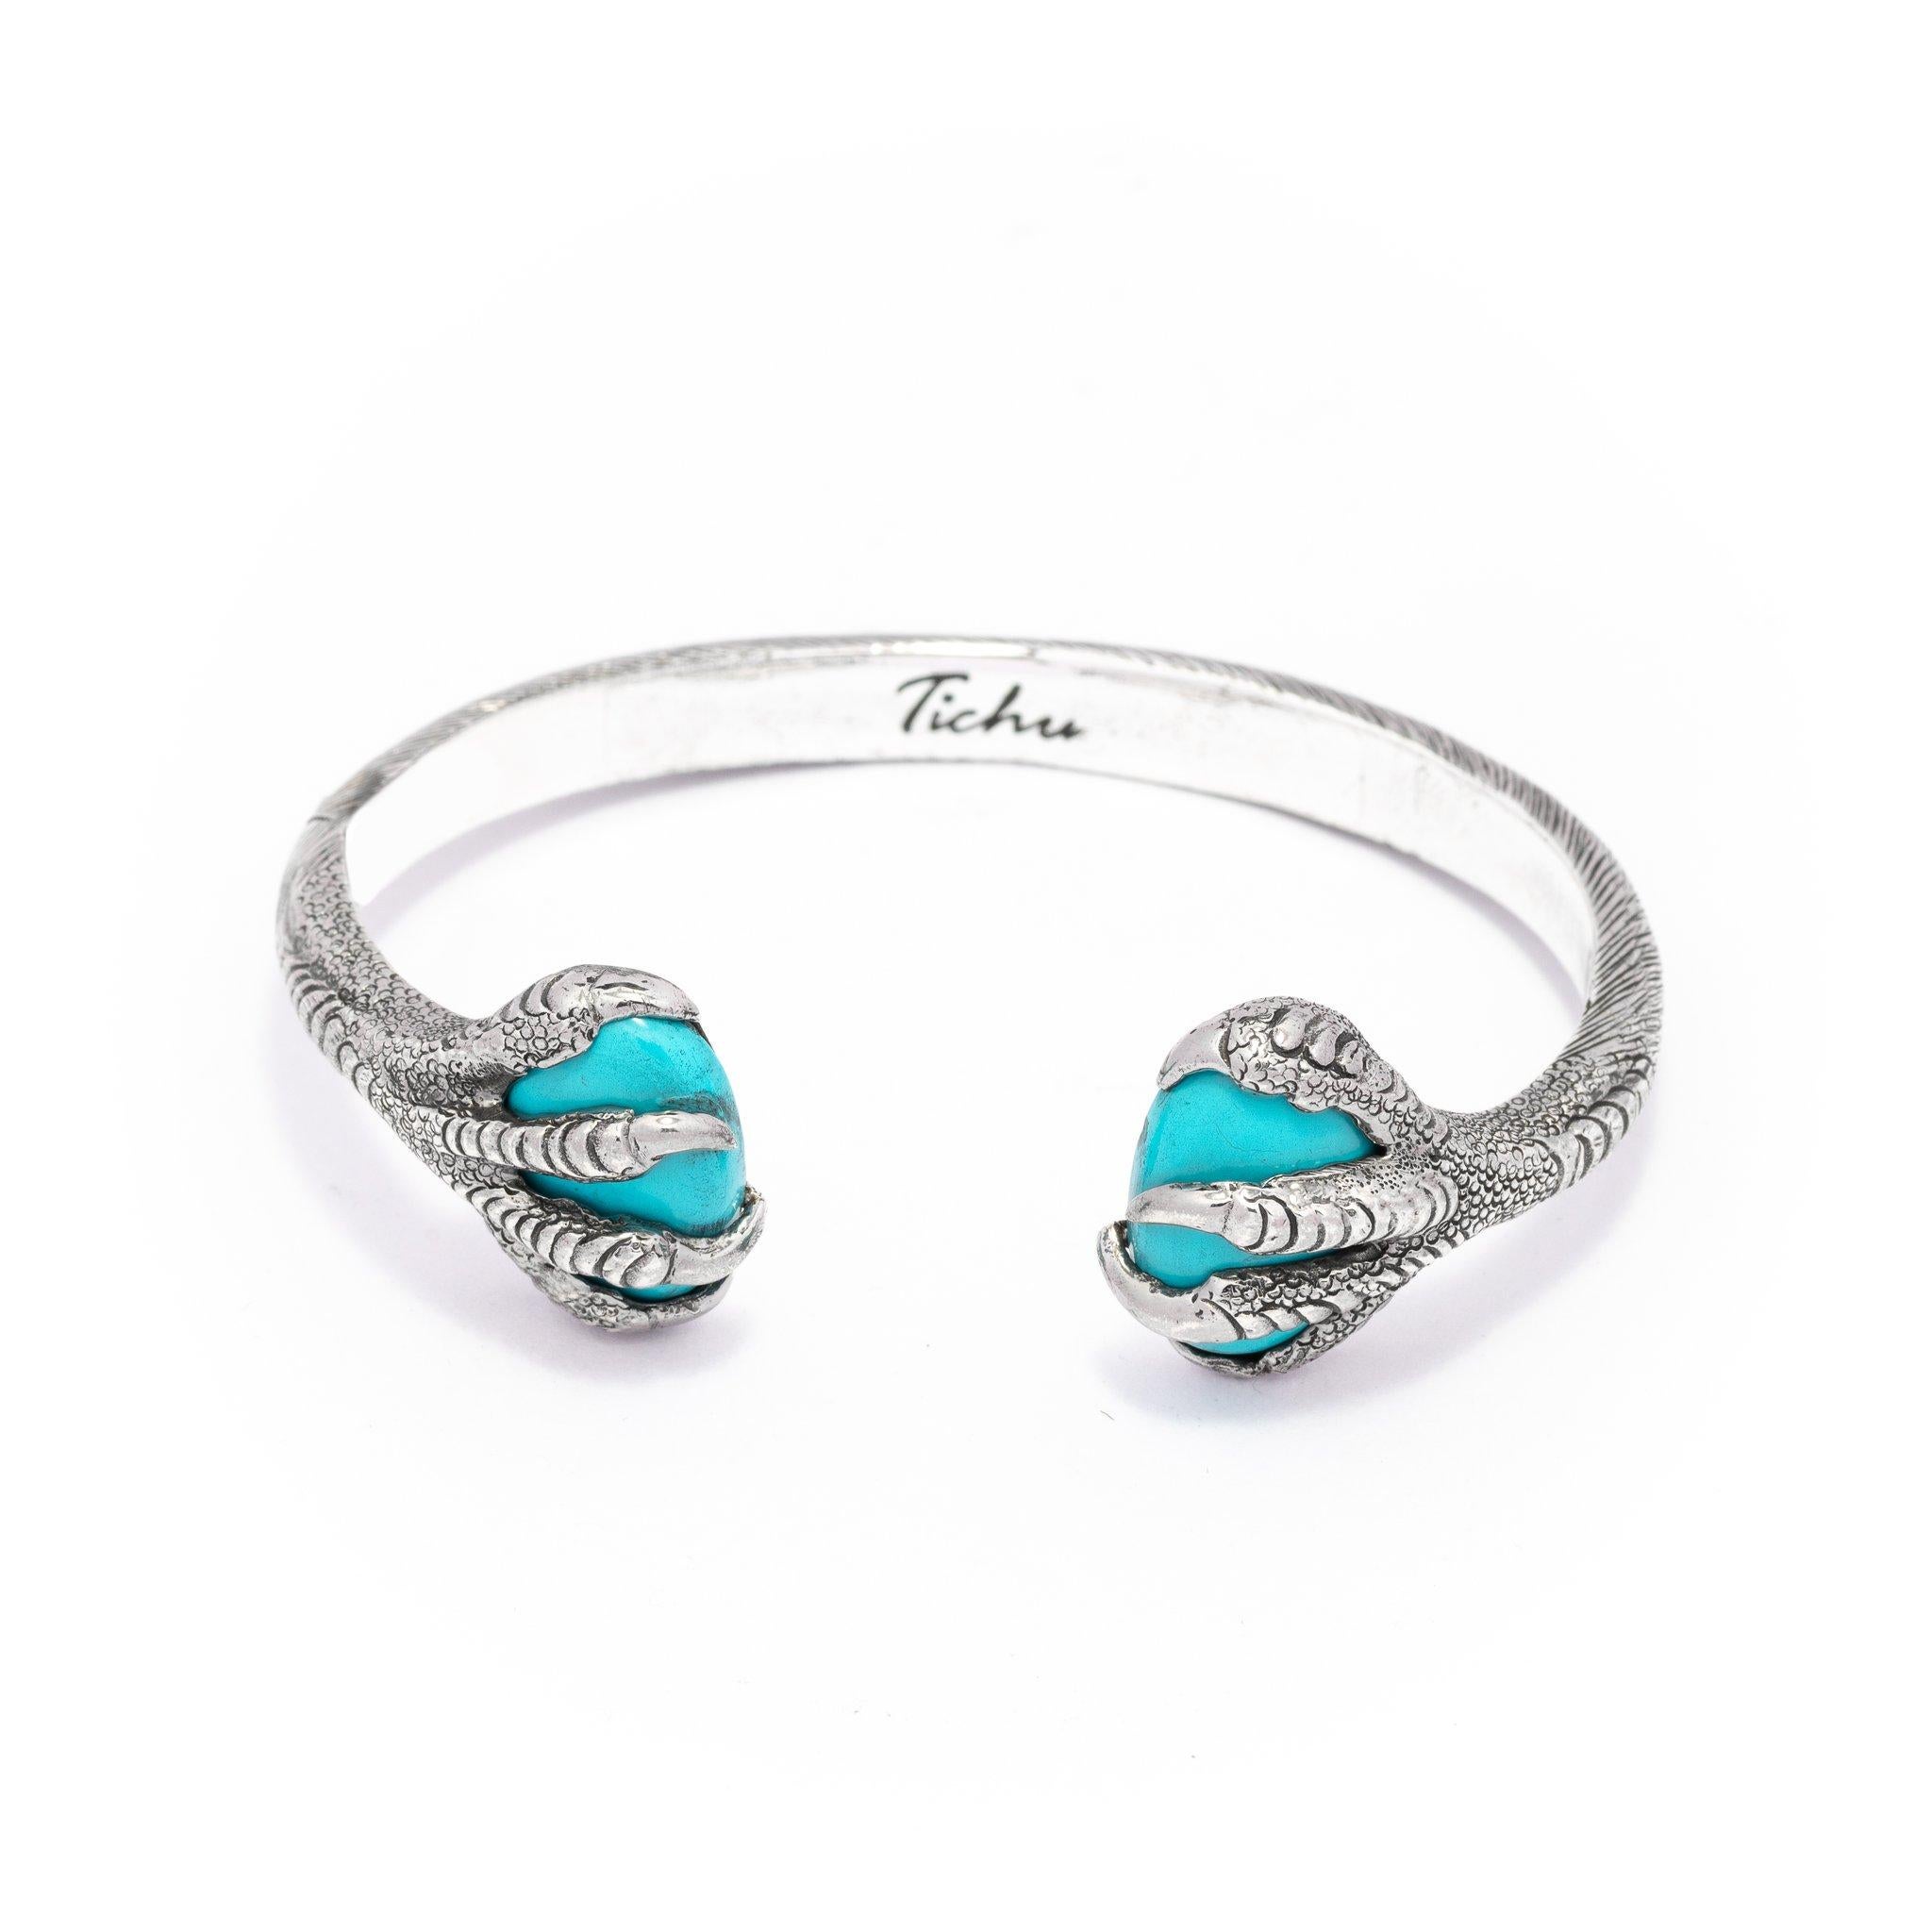 Cabochon Tichu Turquoise Eagle Claw Cuff in Silver Sterling & Crystal Quartz, Size 'L' For Sale